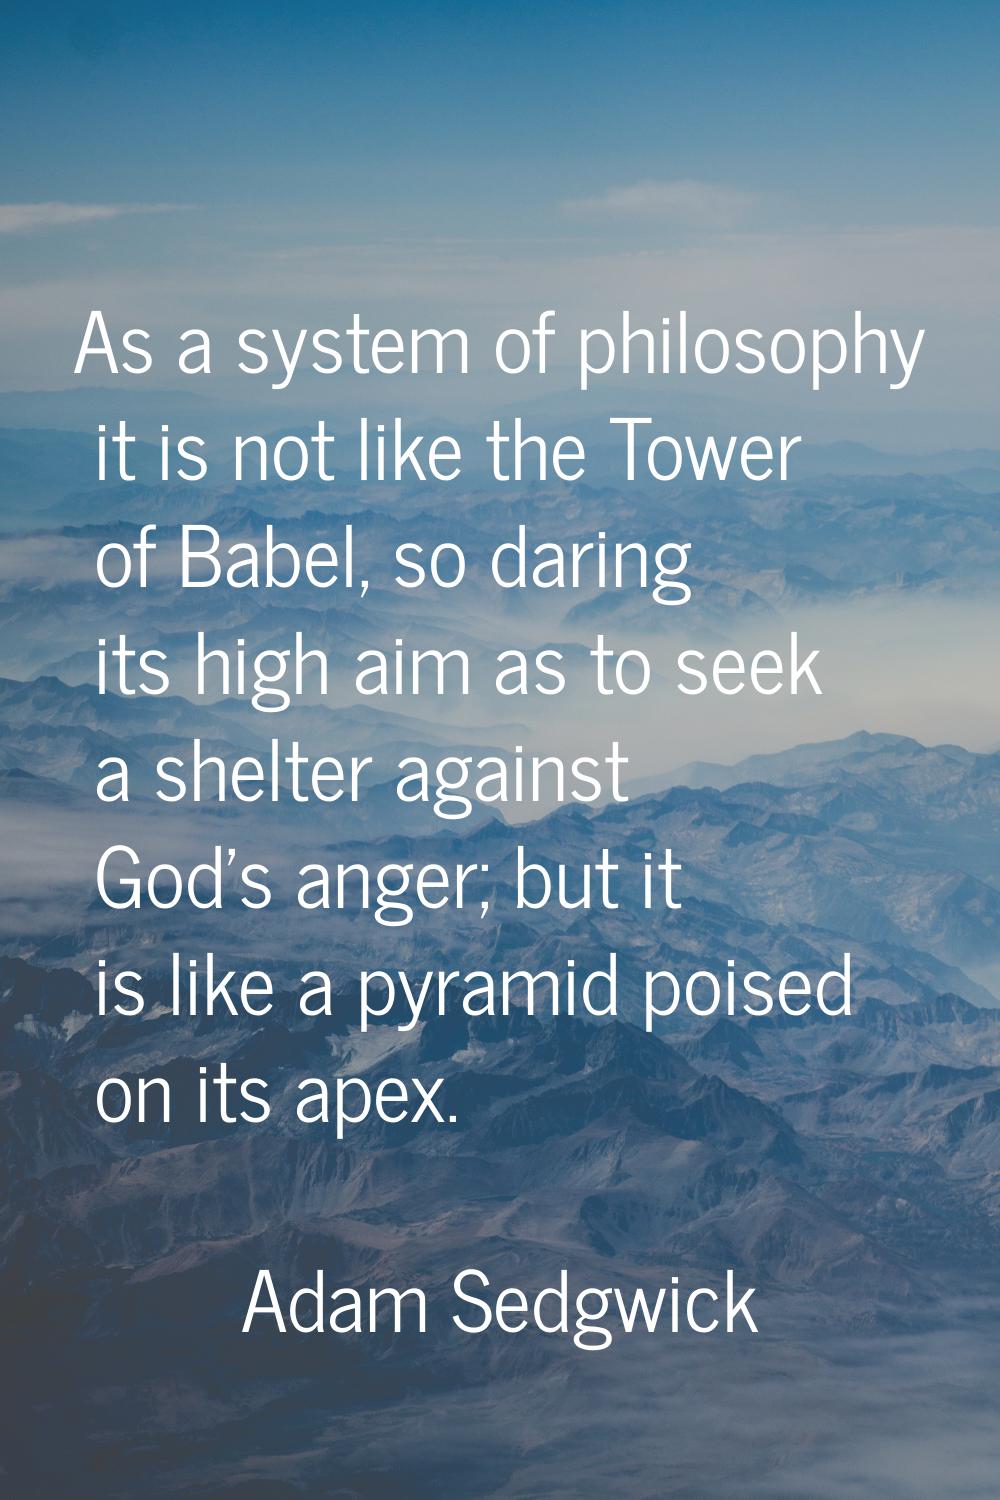 As a system of philosophy it is not like the Tower of Babel, so daring its high aim as to seek a sh